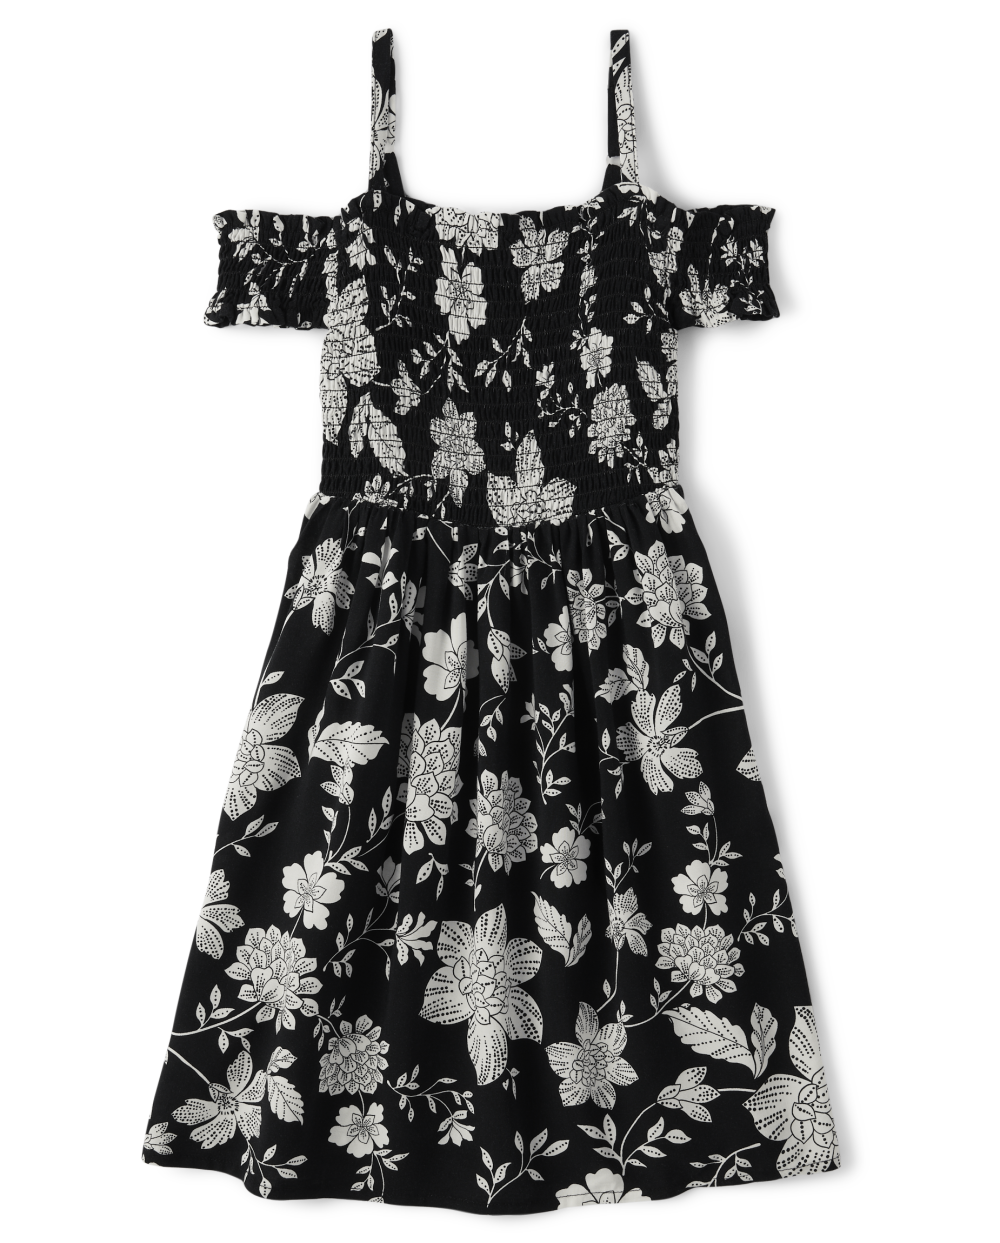 Girls Smocked Floral Print Above the Knee Ruffle Trim Cold Shoulder Short Sleeves Sleeves Off the Shoulder Rayon Dress